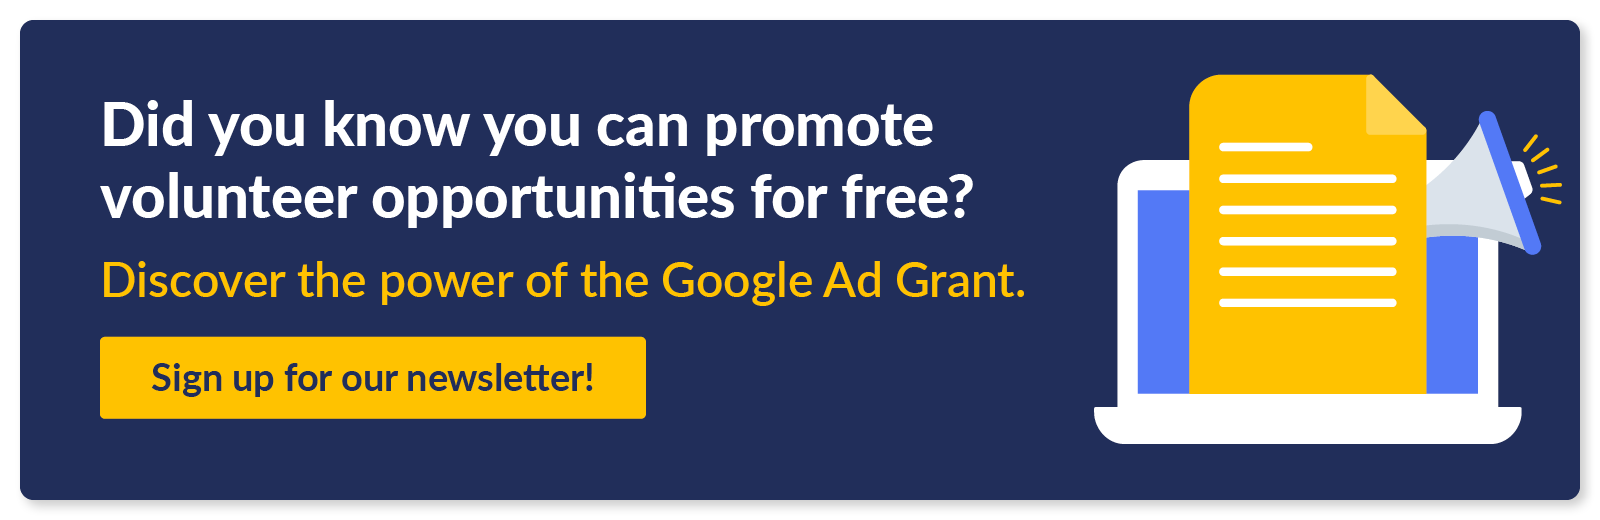 Did you know you can promote volunteer opportunities for free? Discover the power of the Google Ad Grant. Sign up for our newsletter!